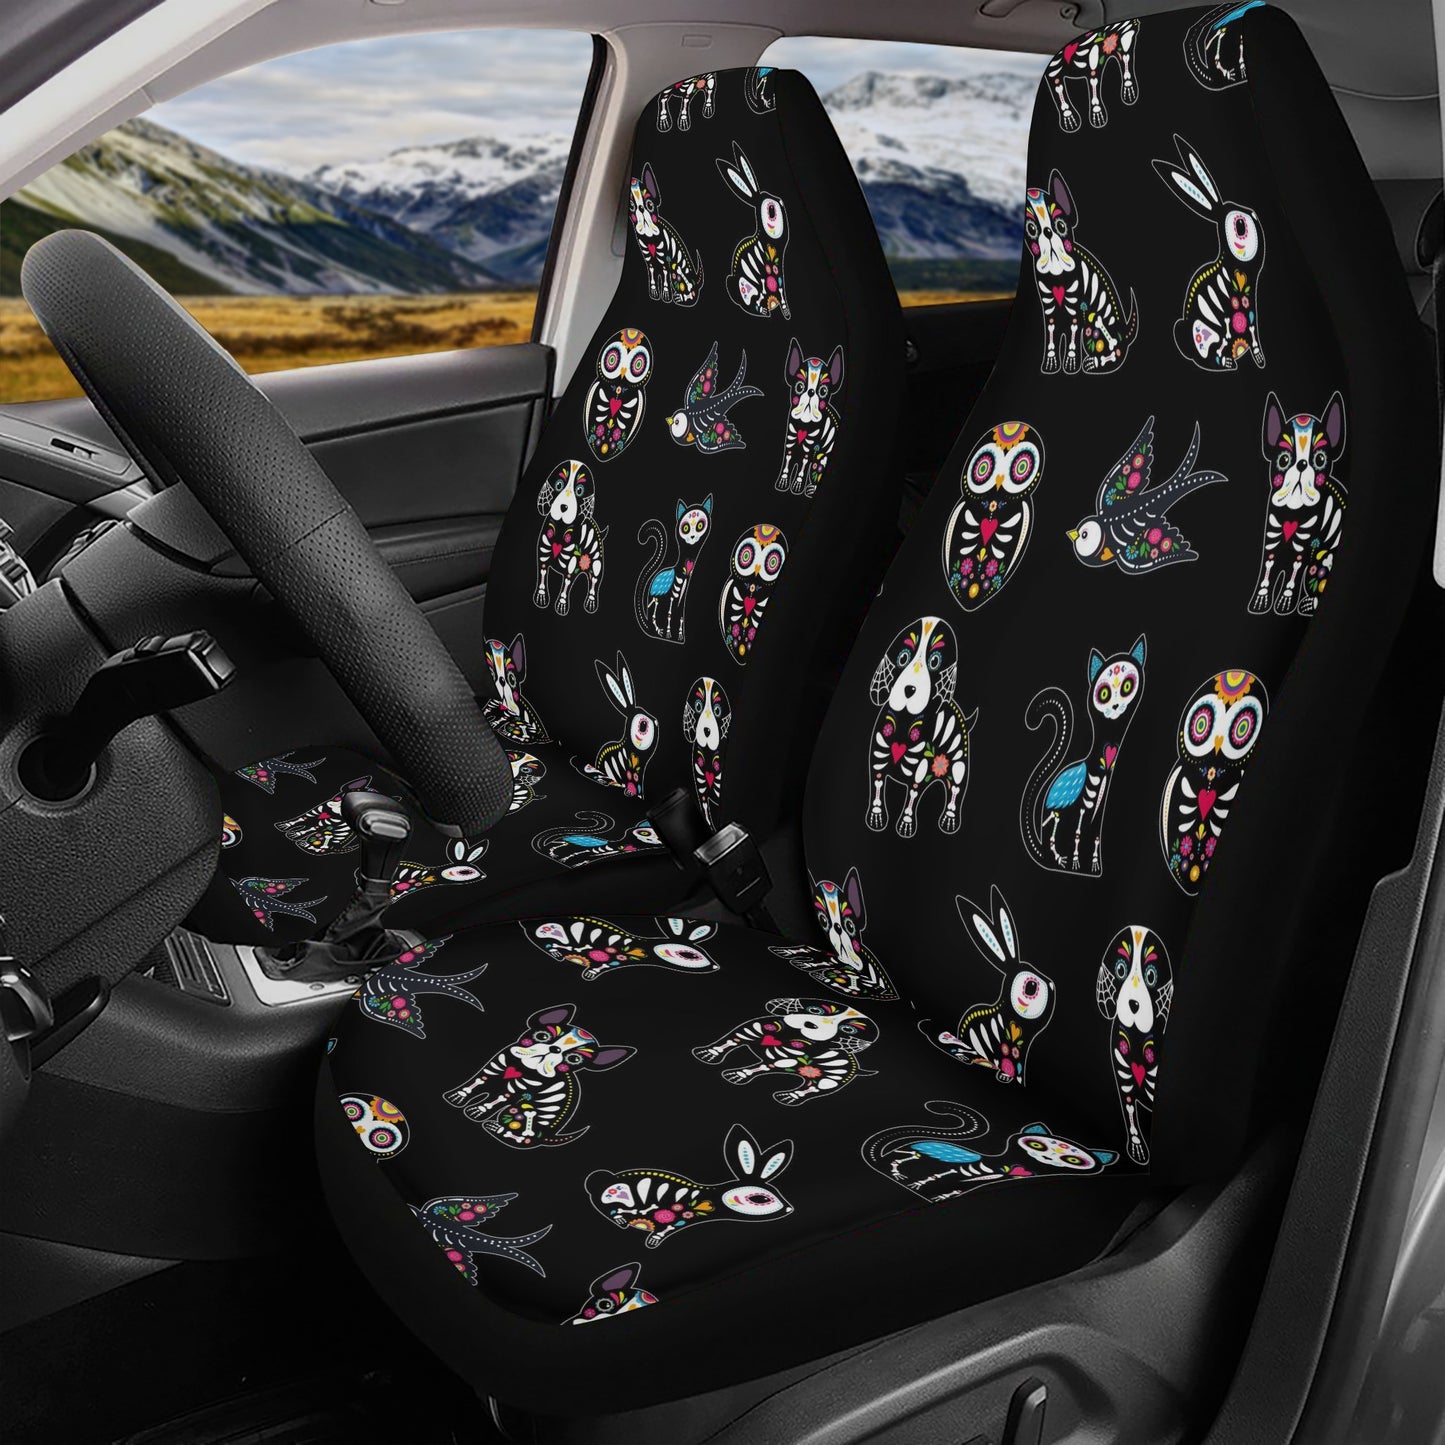 Mexico car accessories, calaveras skull car seat cover, mexican skull car seat cushion cover, calaveras skull seat cover for vehicles, day o